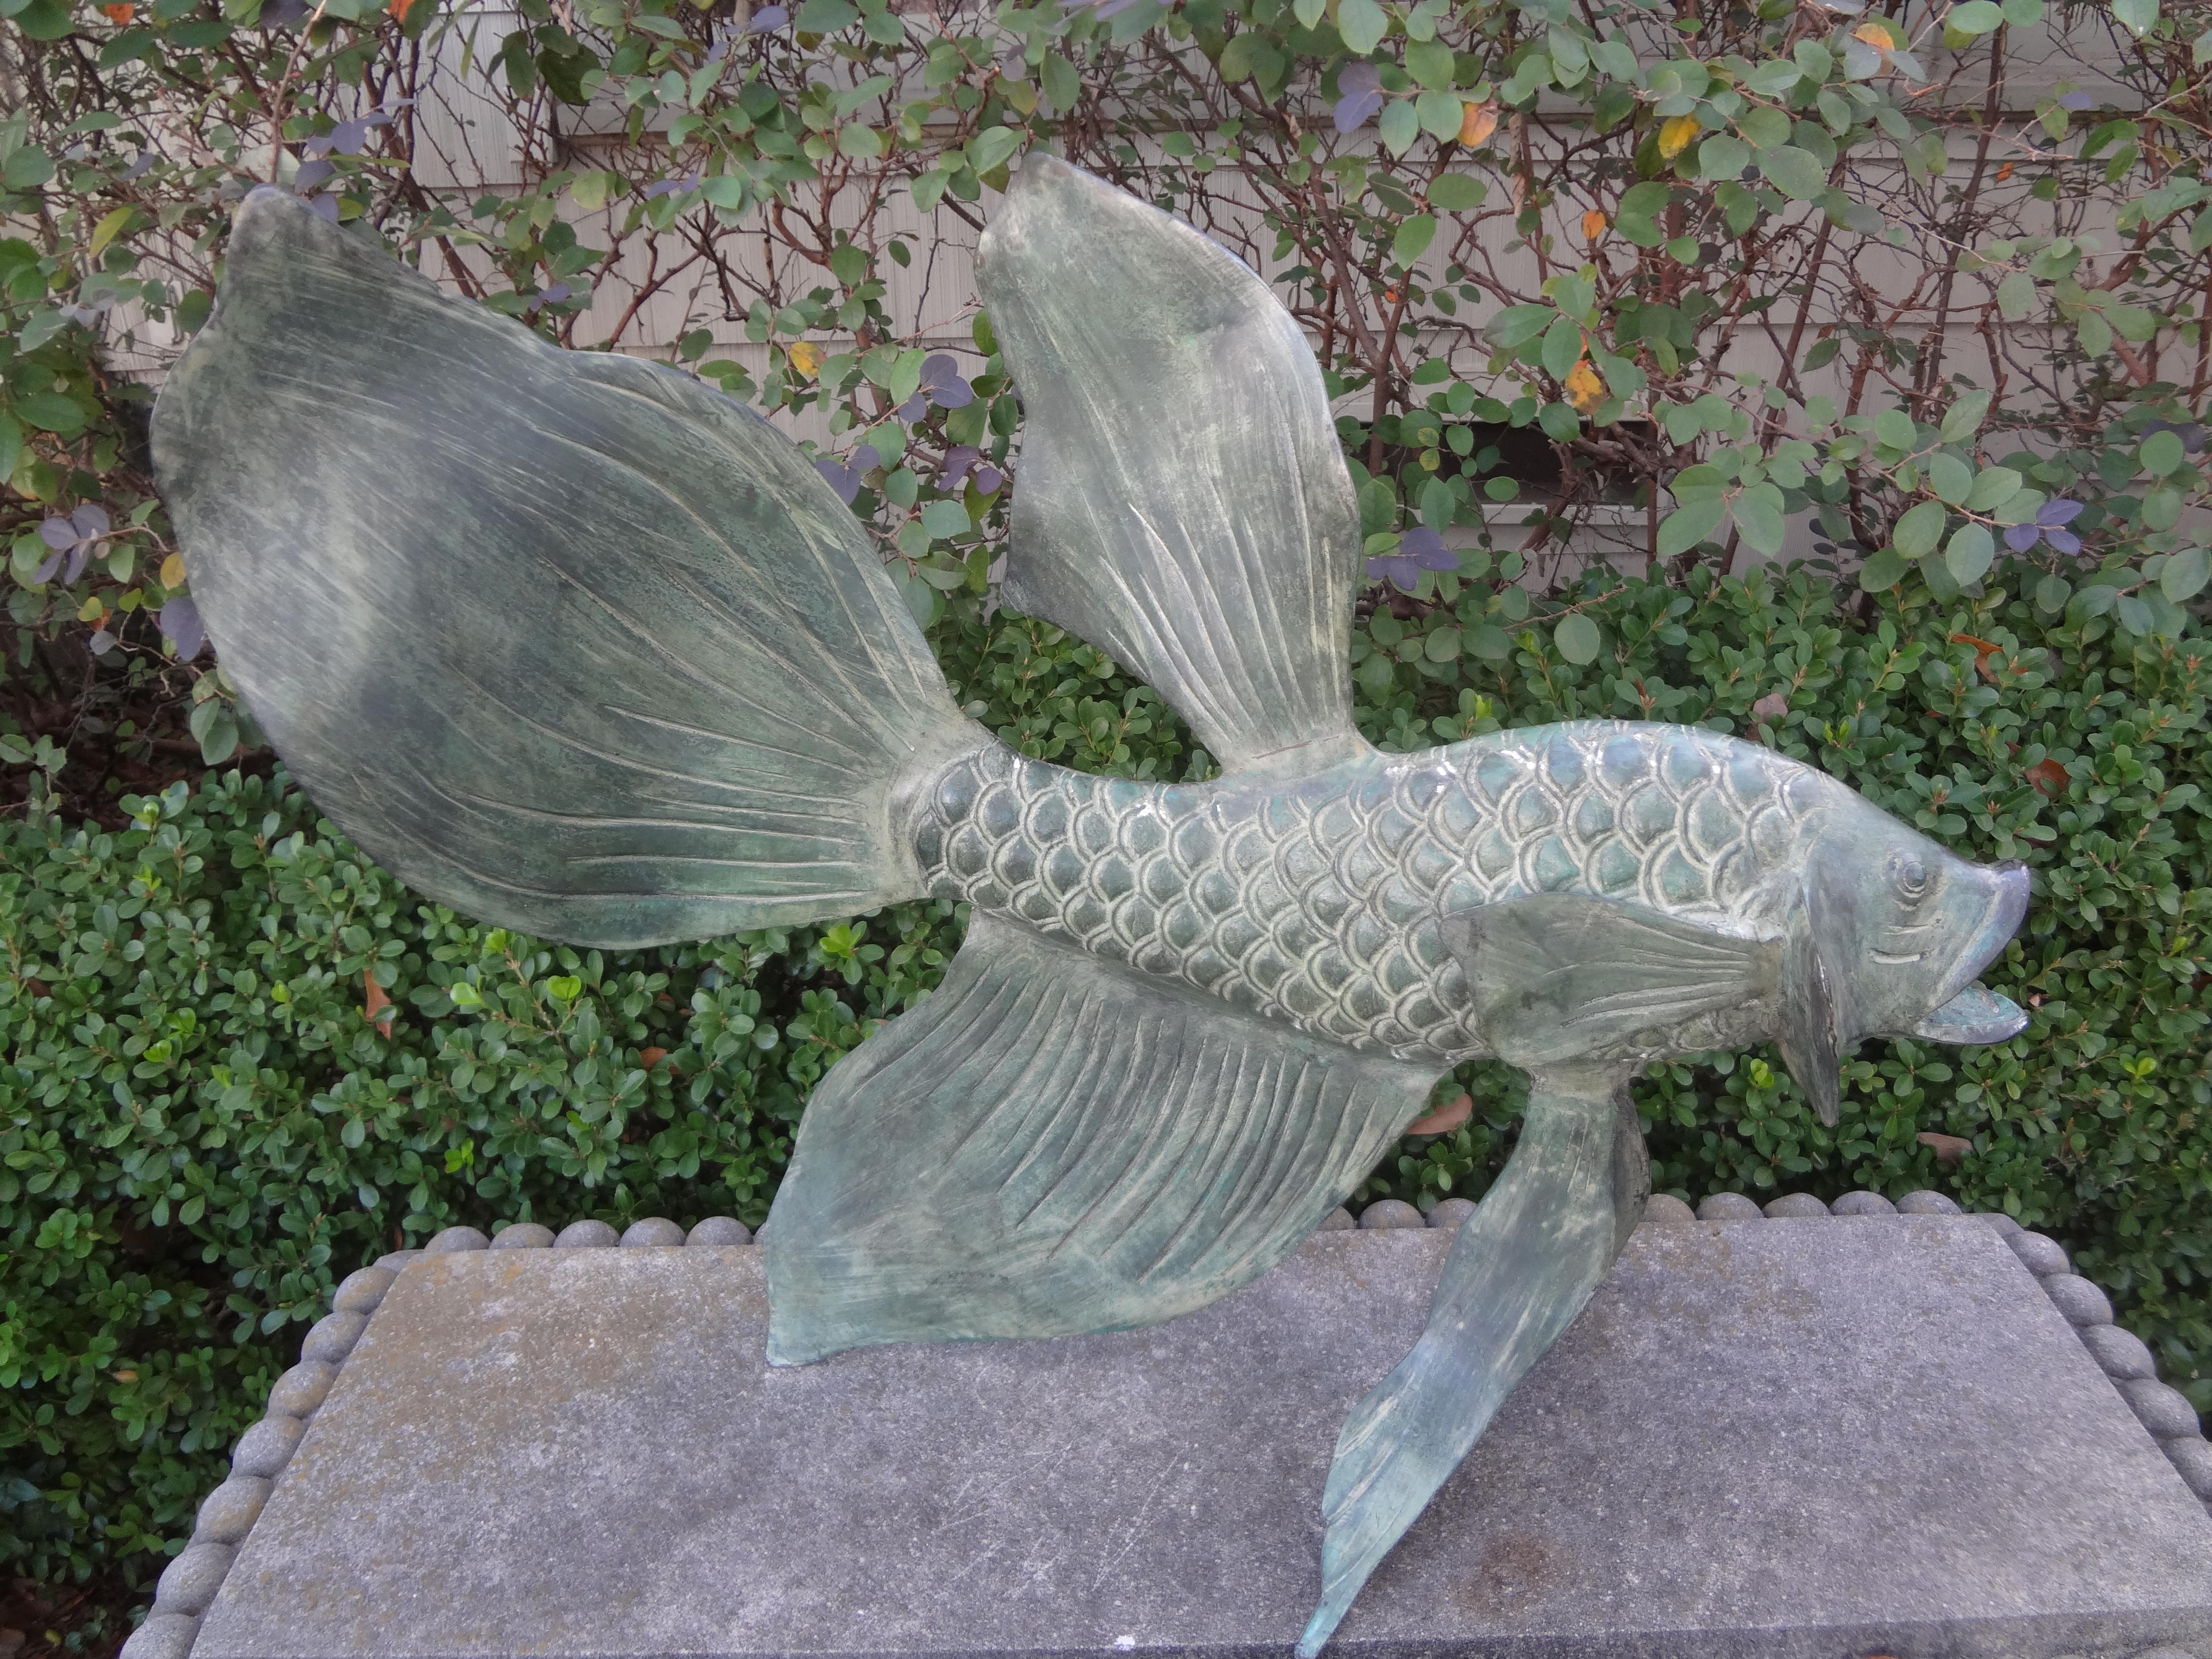 Japanese Bronze Koi Fish Sculpture.
This well executed Japanese bronze Koi or Goldfish sculpture has a beautiful patinated verdigris finish and will look great either indoors or outdoors in a garden setting.
We date this piece from